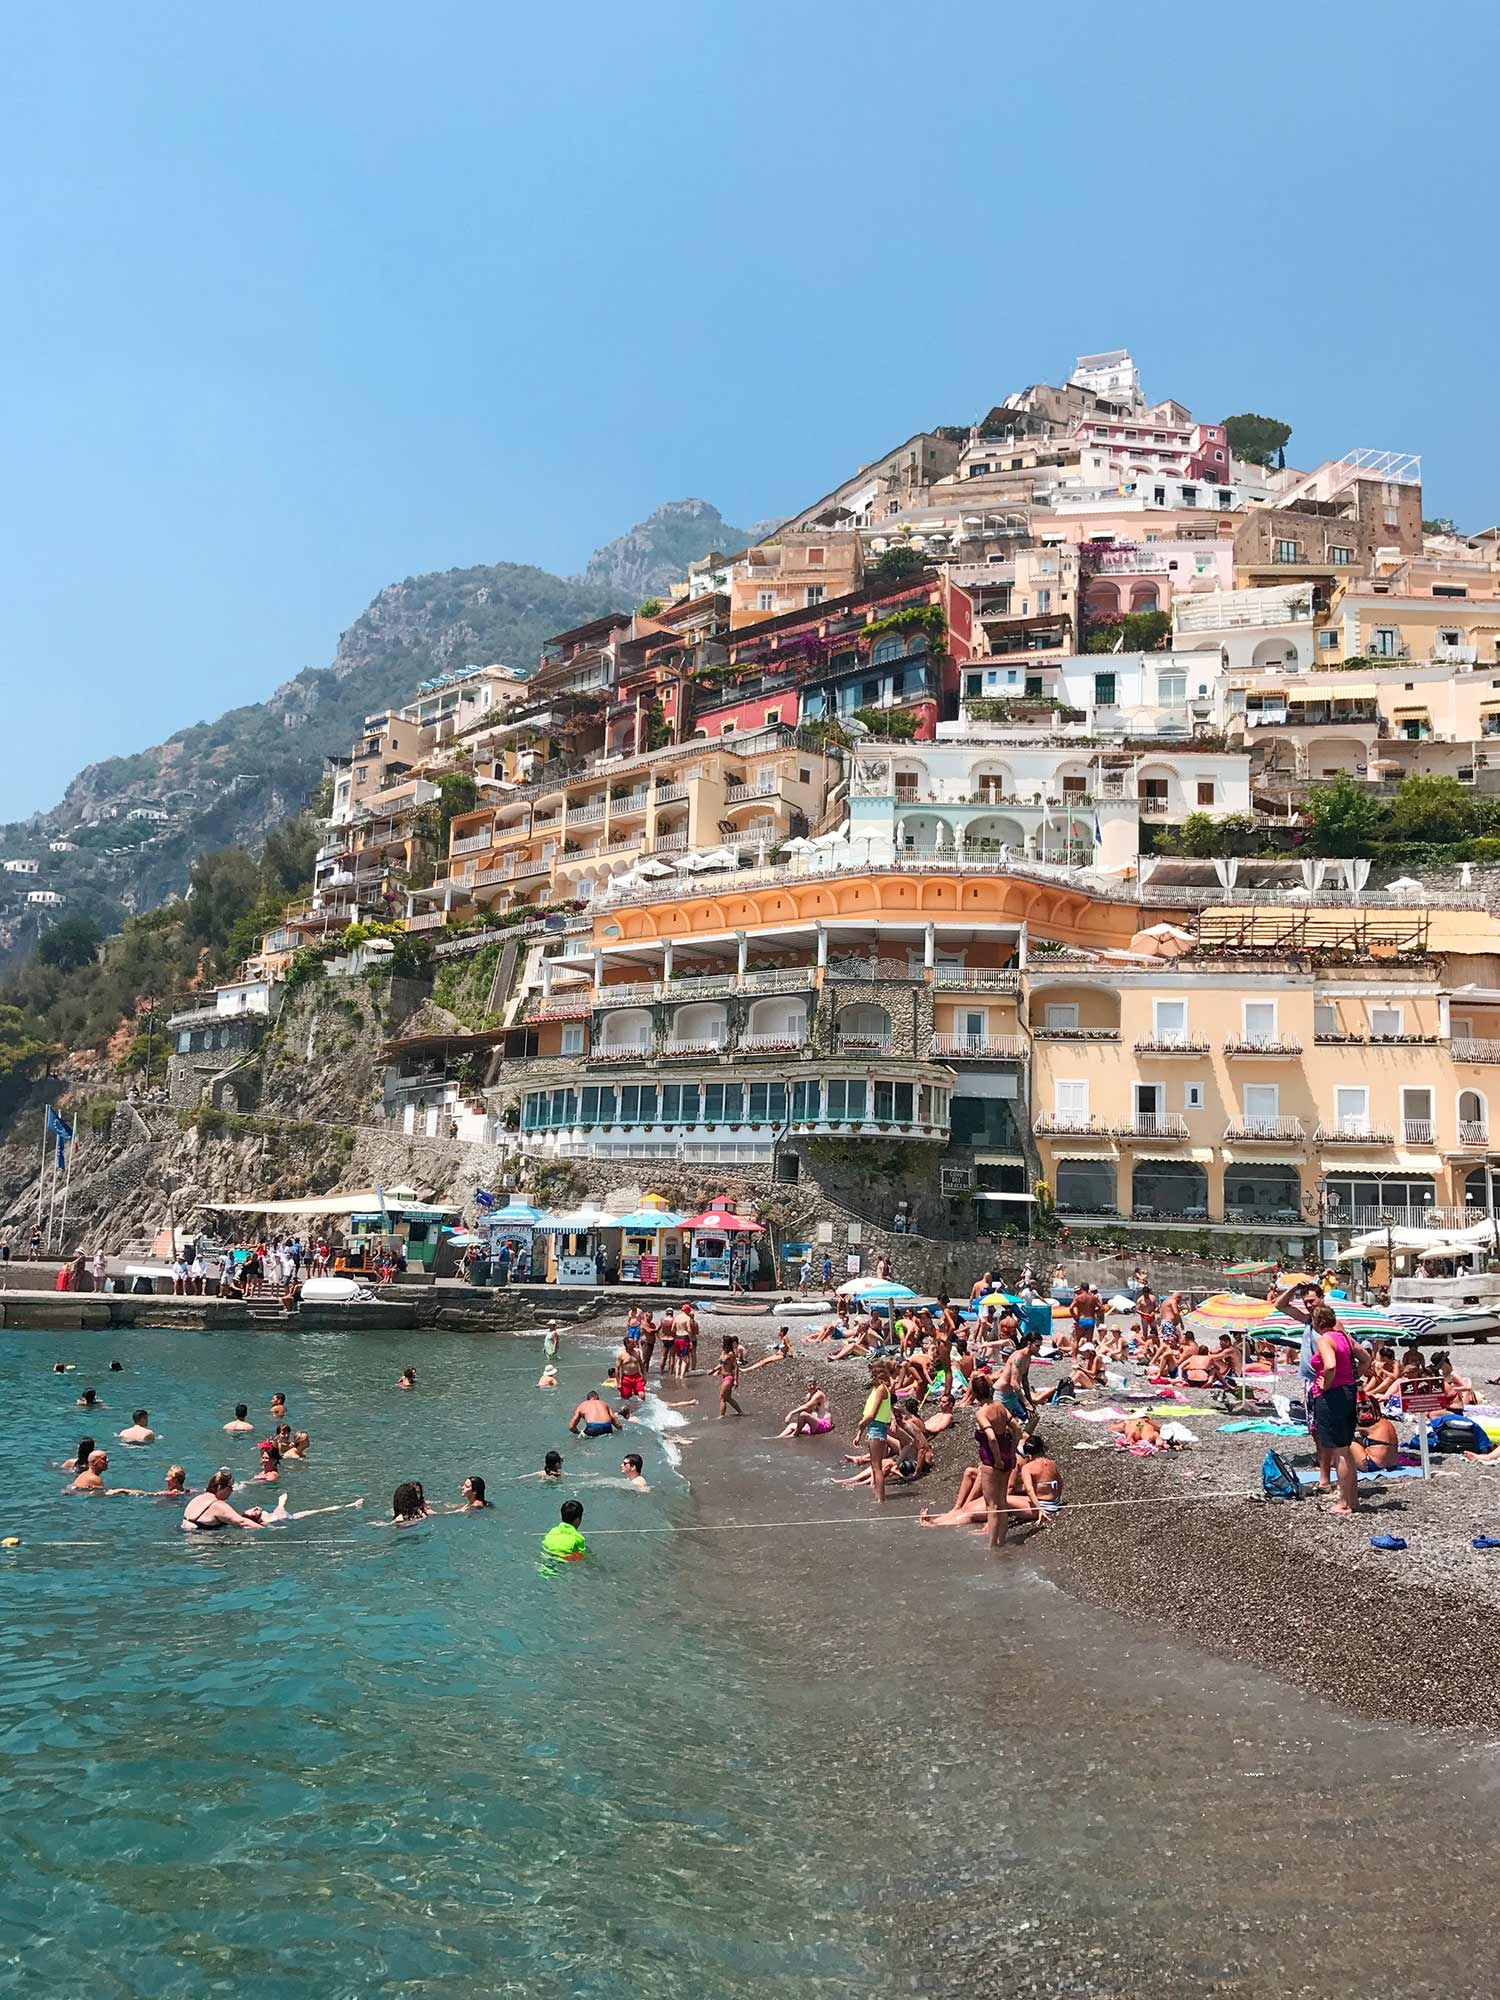 The busy main beach of Positano is surrounded by colourful buildings and a rocky shore 